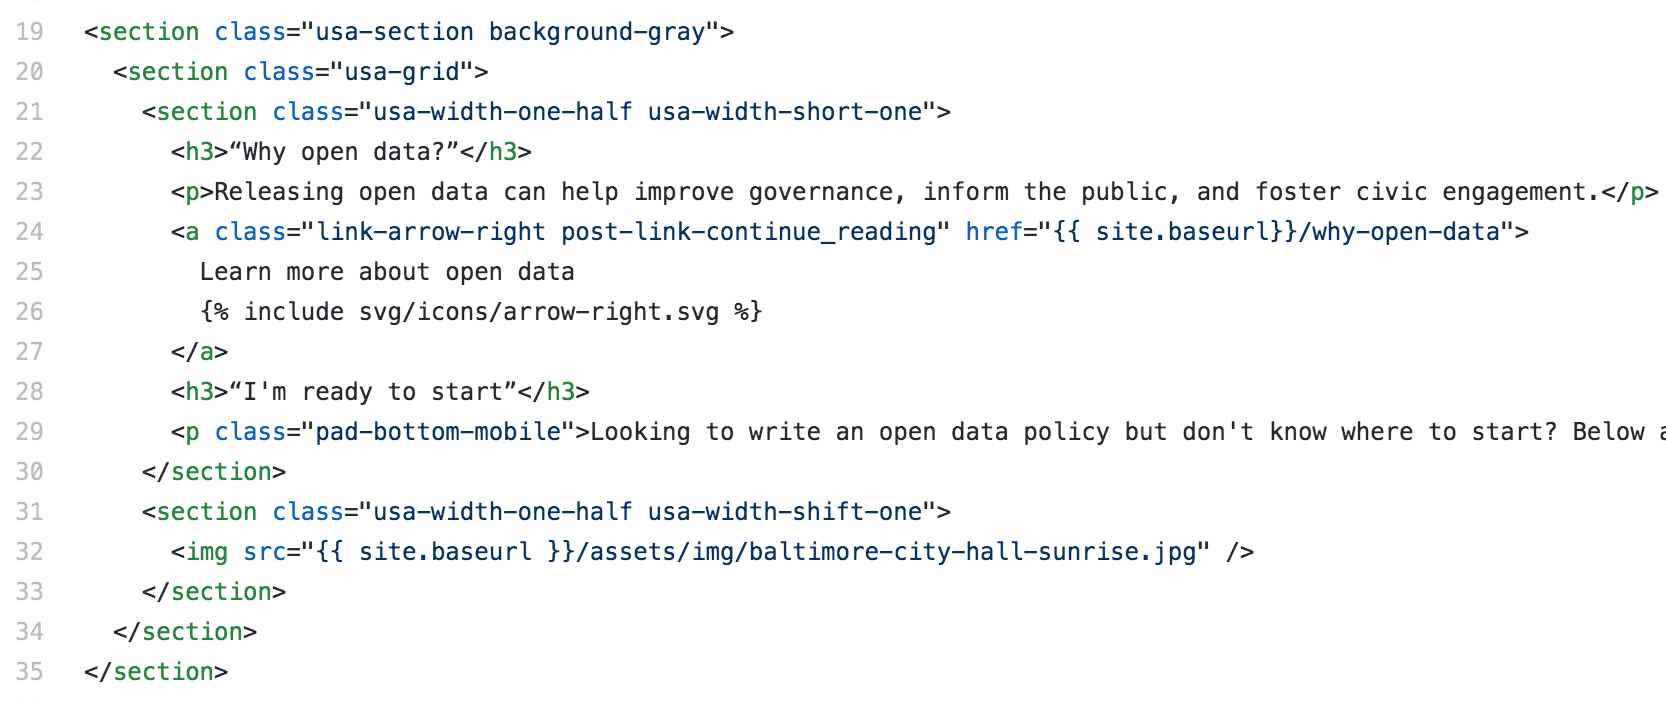 HTML from the home page of the Open Data Policy Hub